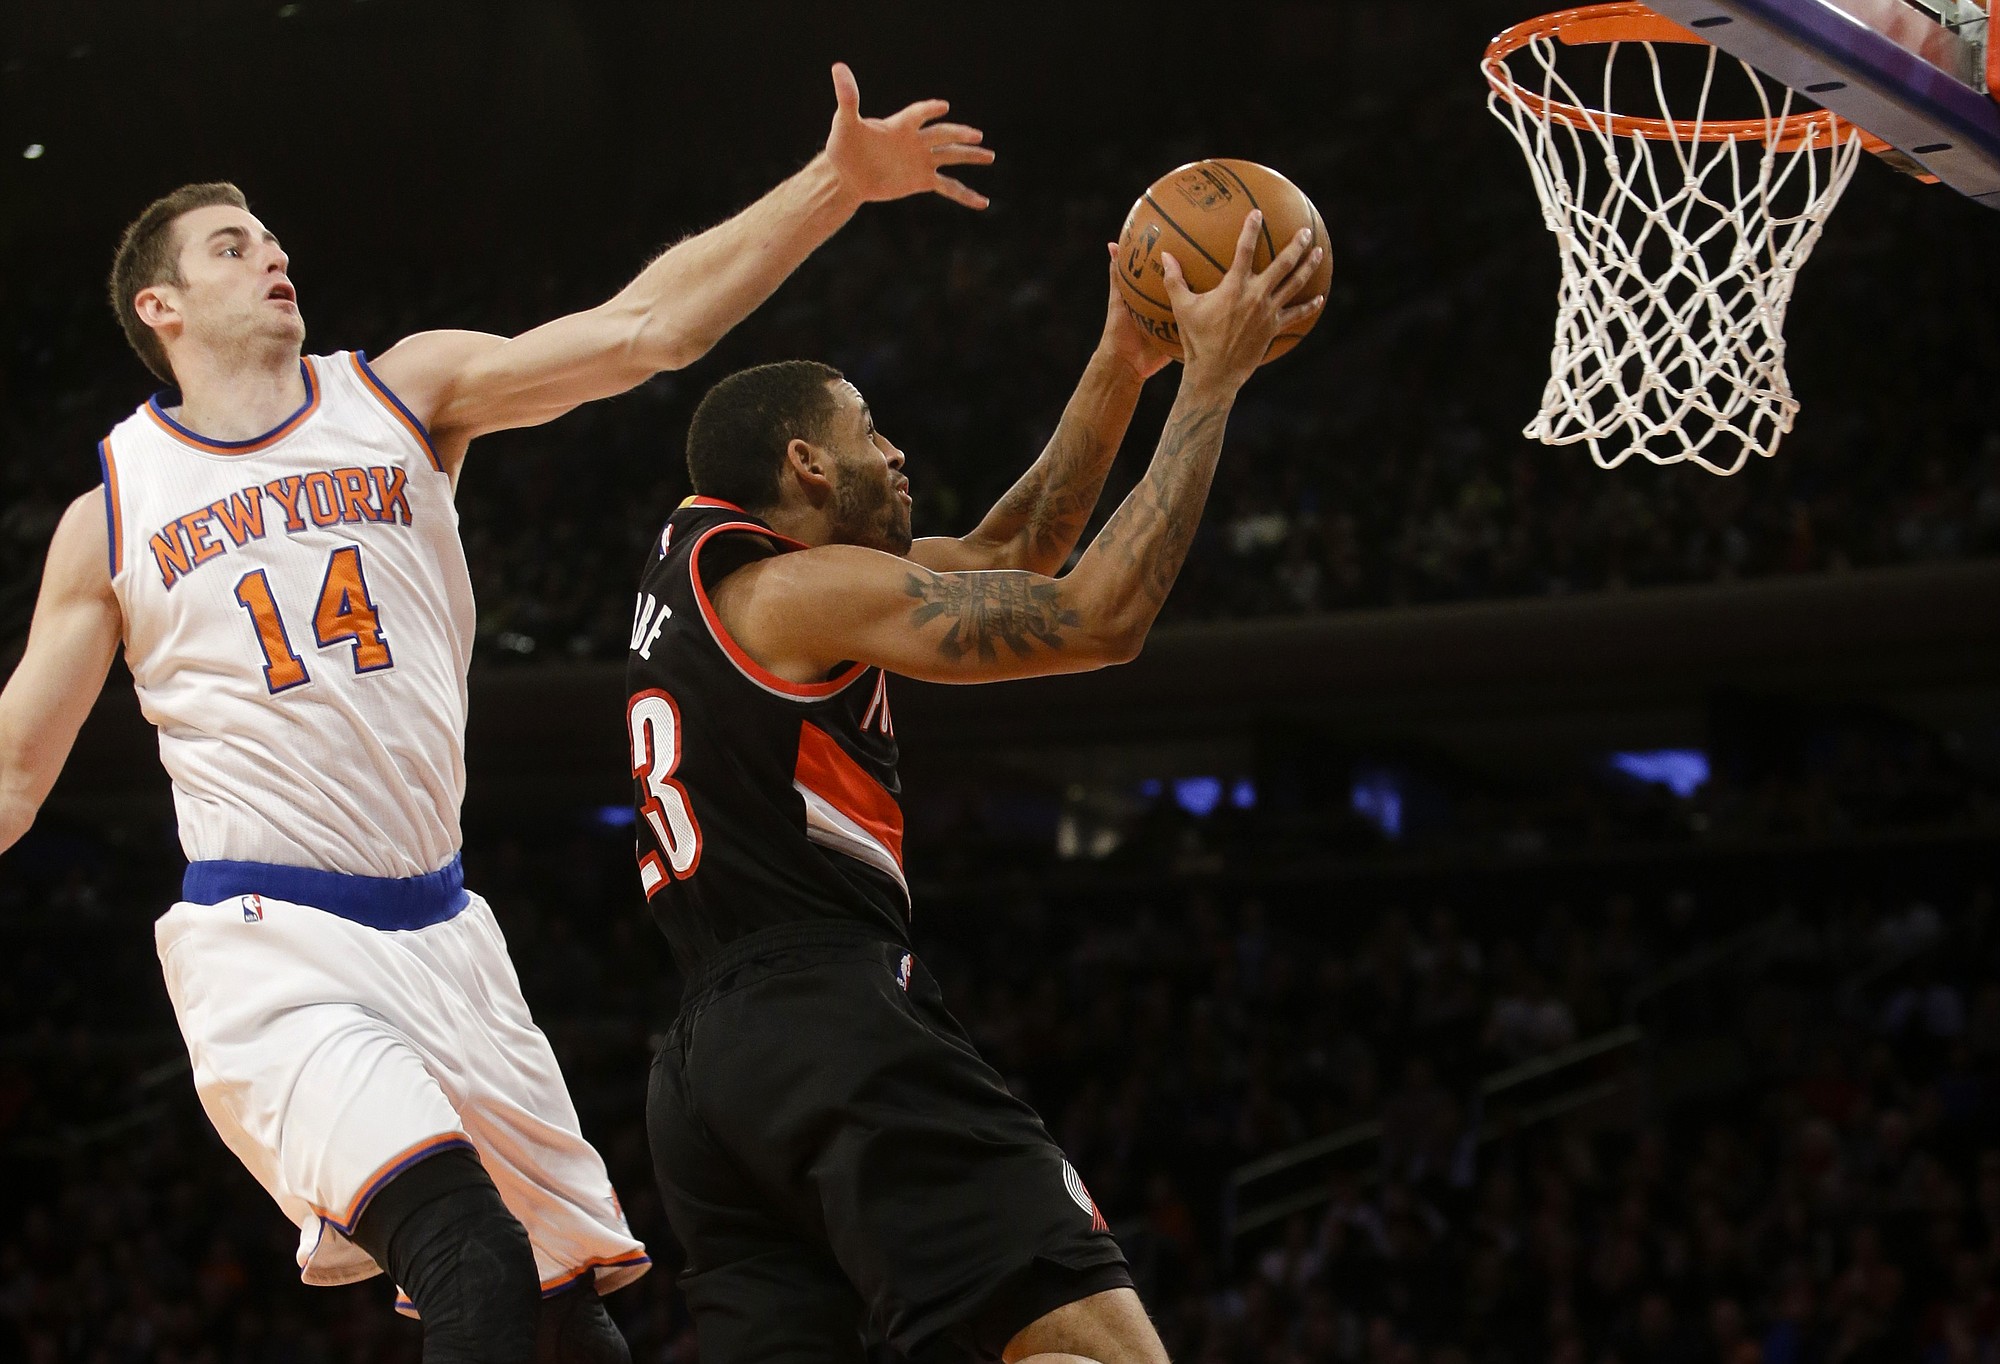 Portland's Allen Crabbe (23) drives past New York's Jason Smith (14) during the first half Sunday, Dec. 7, 2014, in New York.